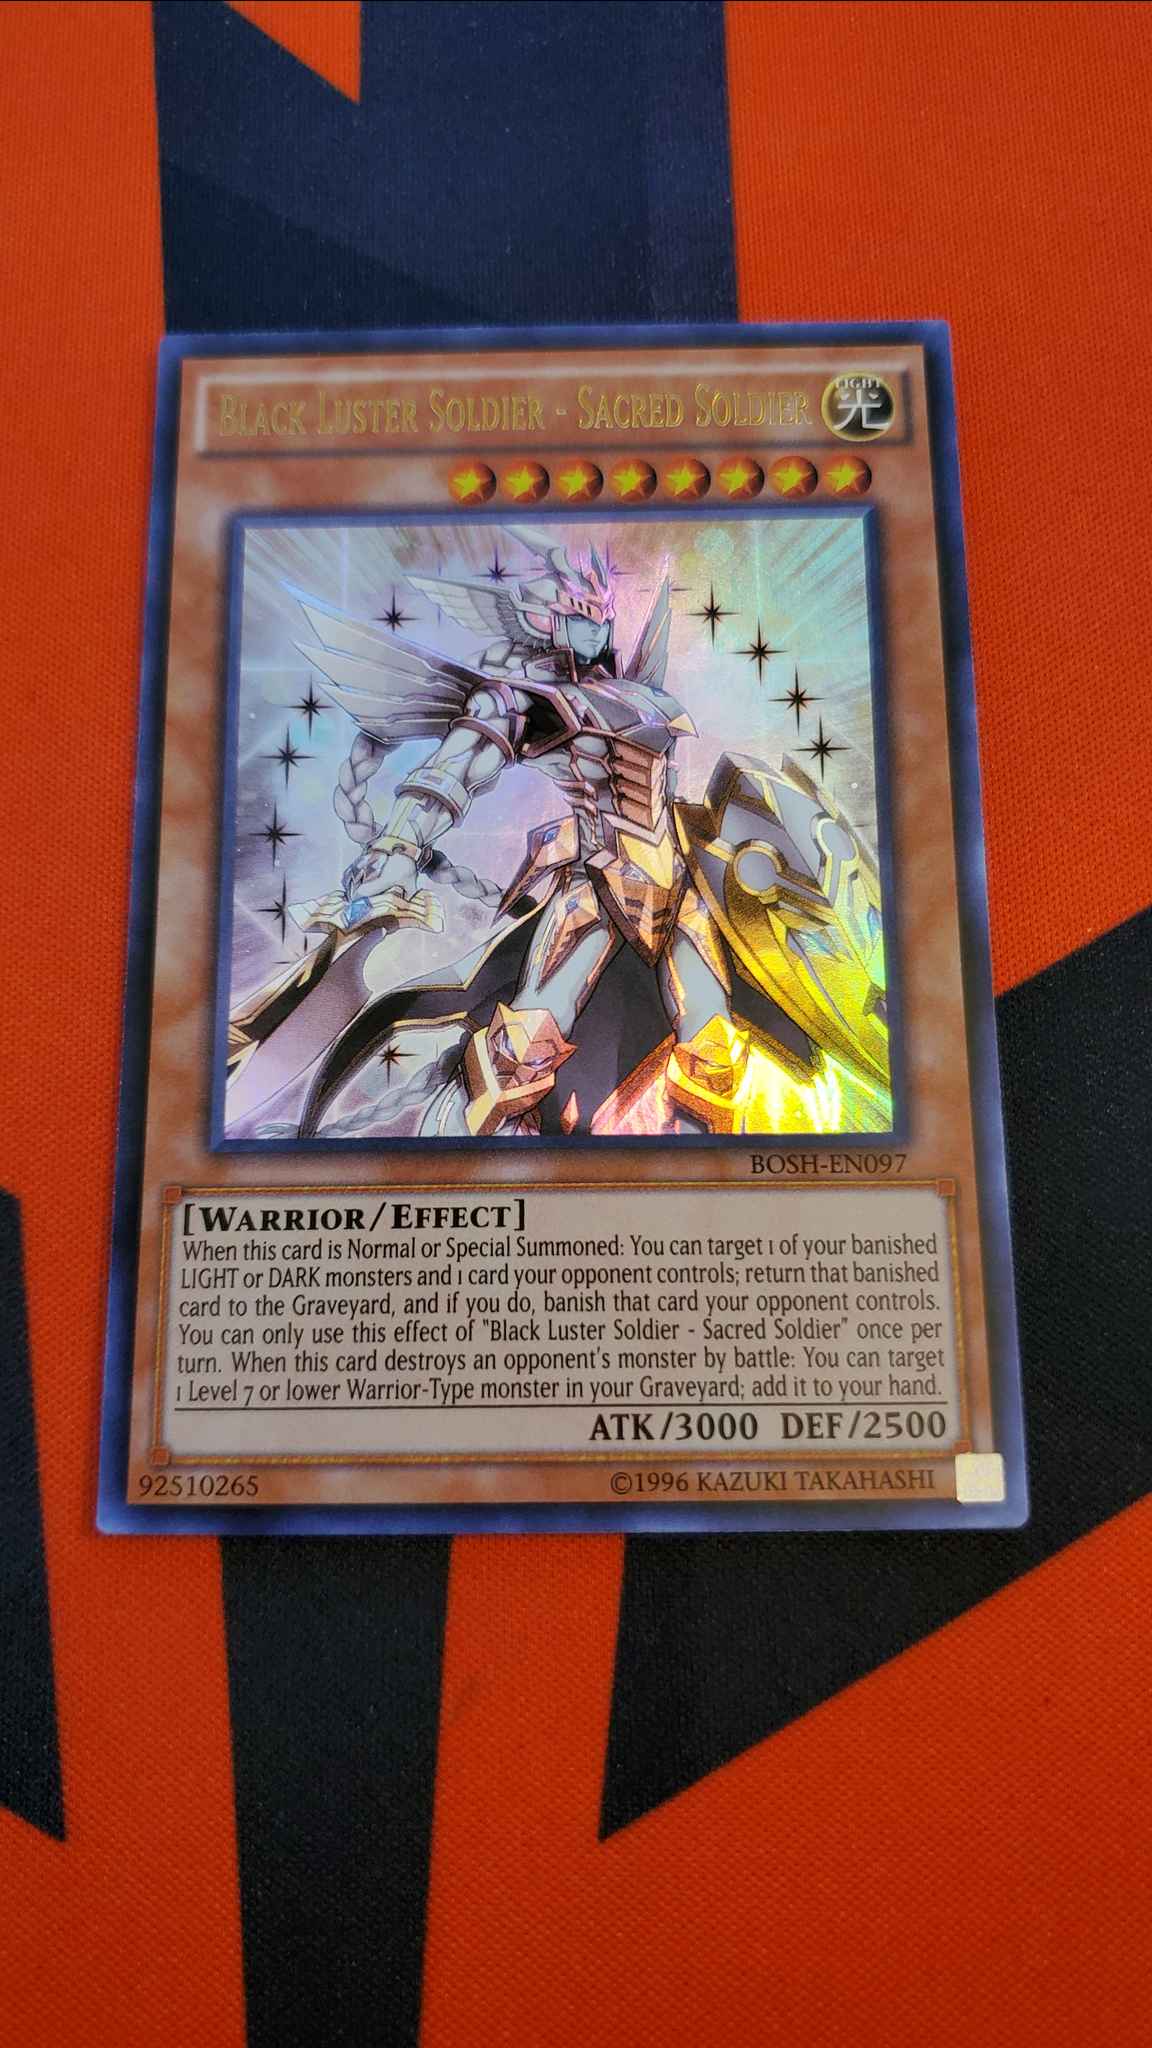 Rare YUGIOH Card Mint Black Luster Soldier Sacred Soldier Near Mint